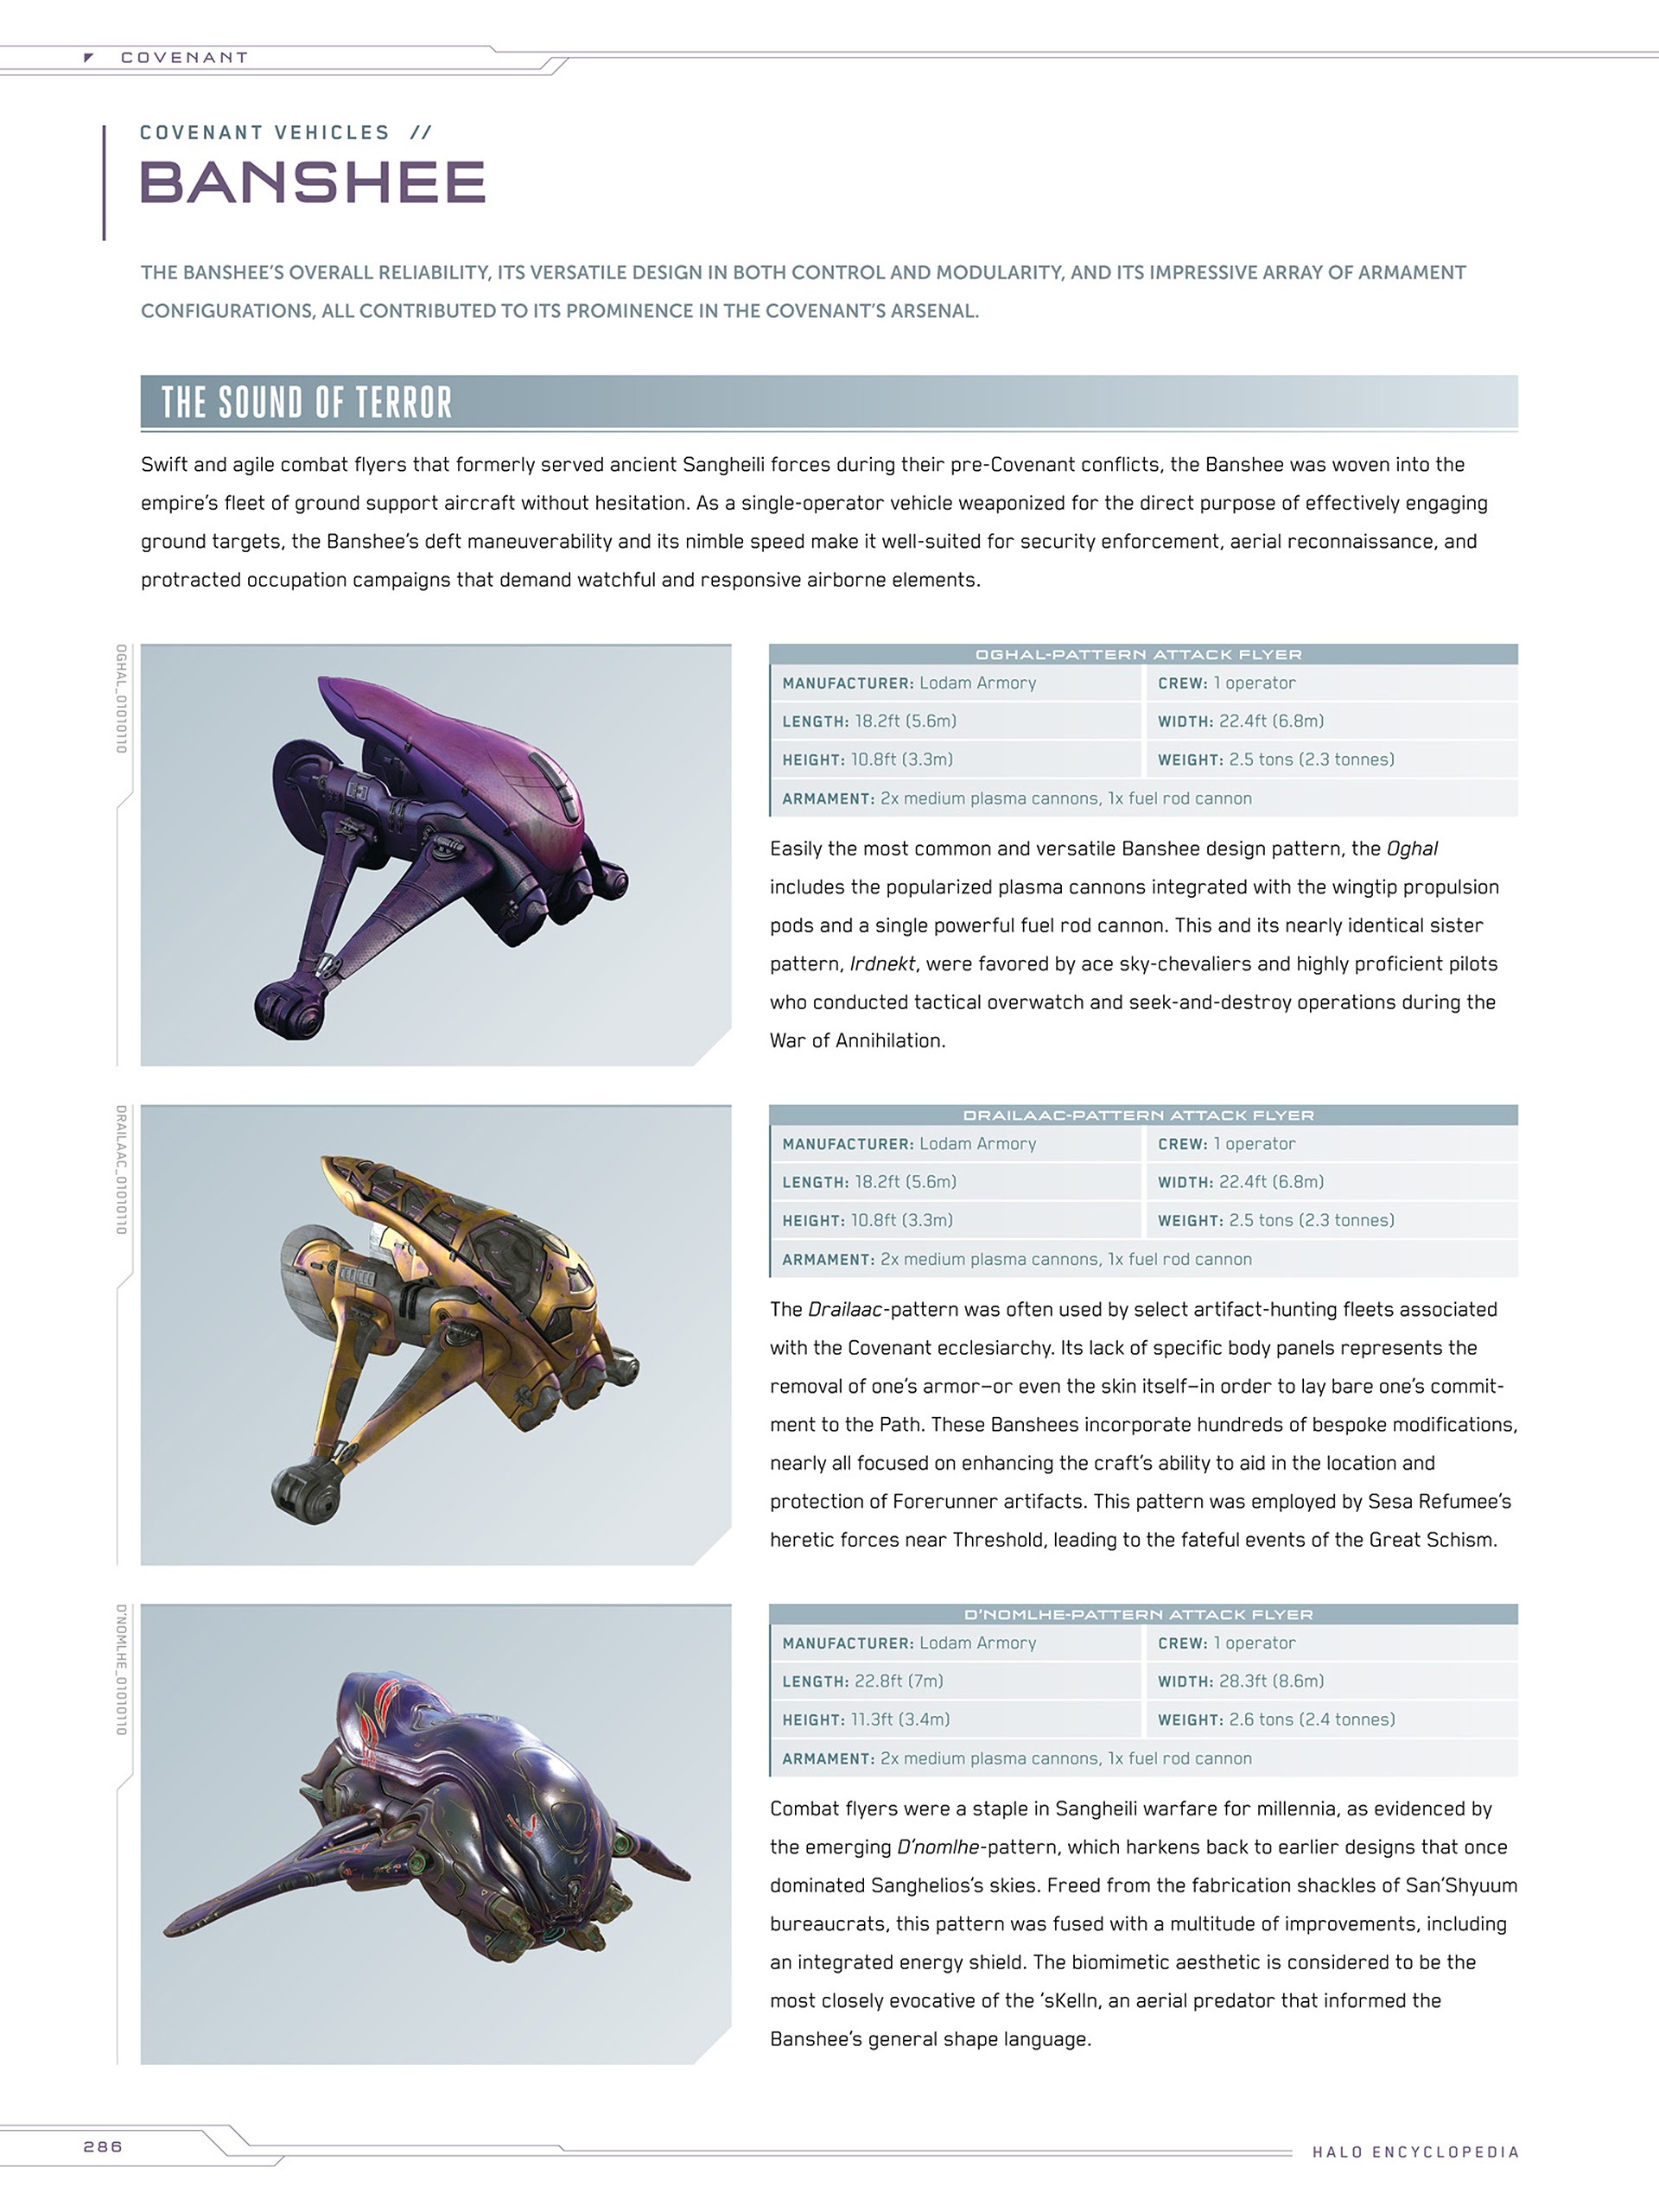 Read online Halo Encyclopedia comic -  Issue # TPB (Part 3) - 82